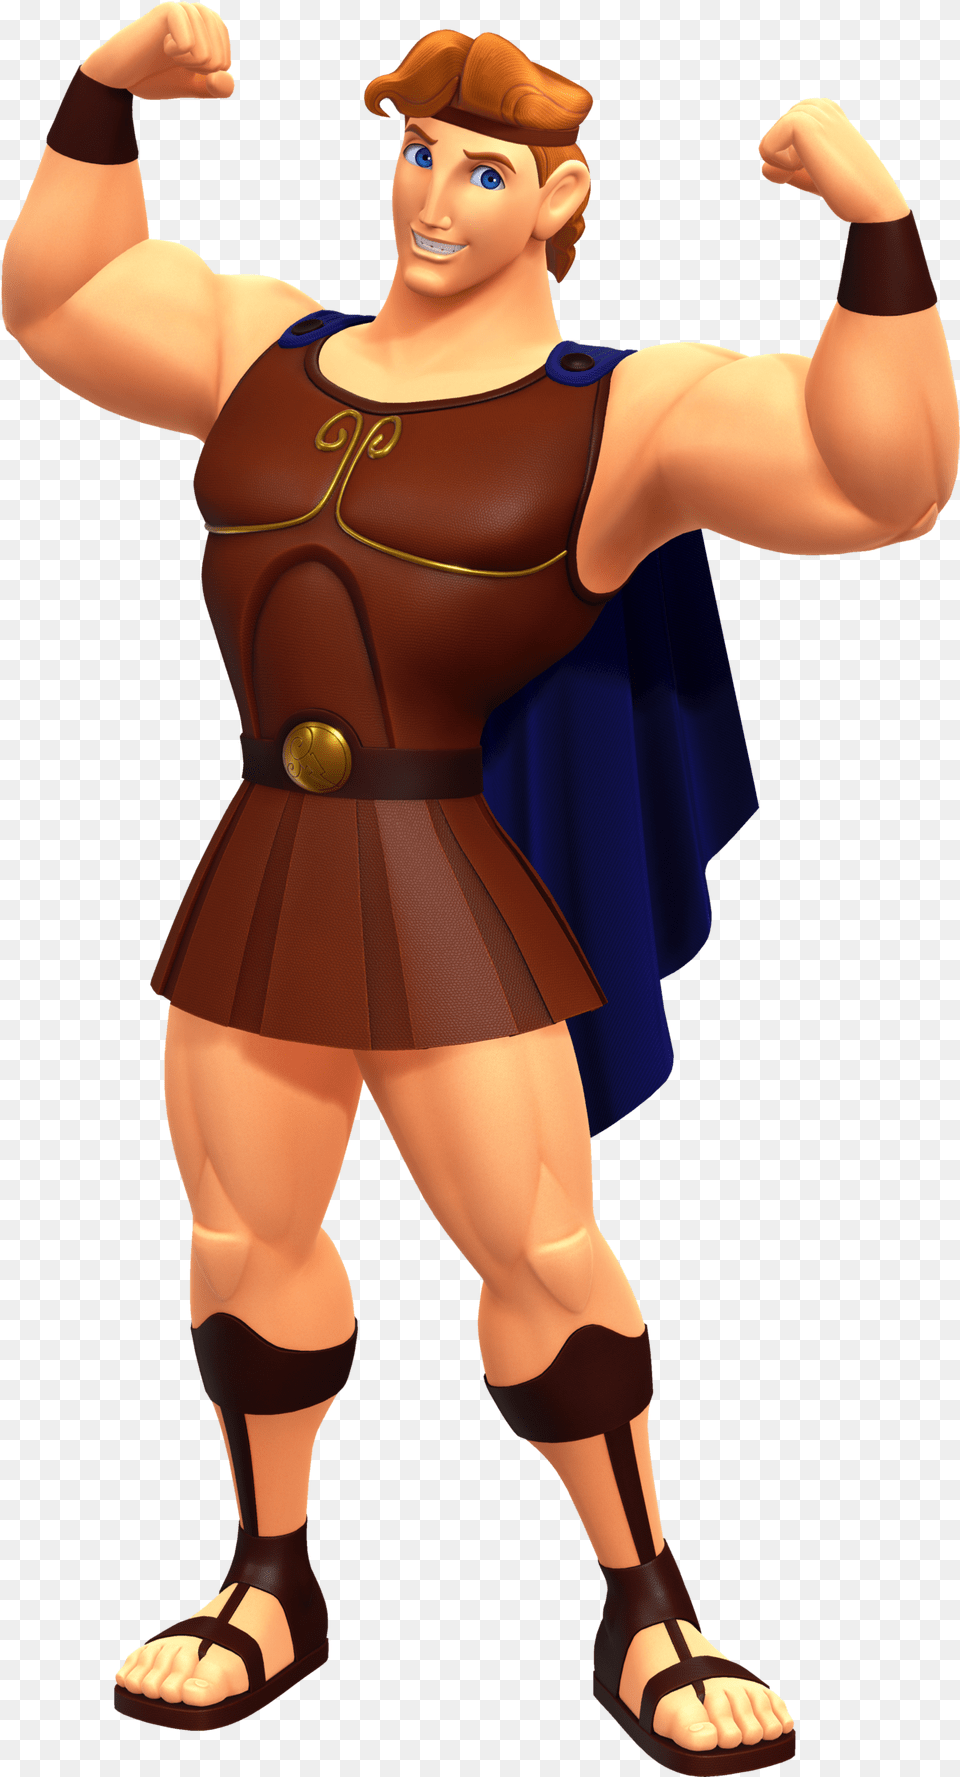 Hercules Kingdom Hearts Wiki The Kingdom Hearts Encyclopedia Kingdom Hearts Hercules, Clothing, Costume, Person, Adult Png Image